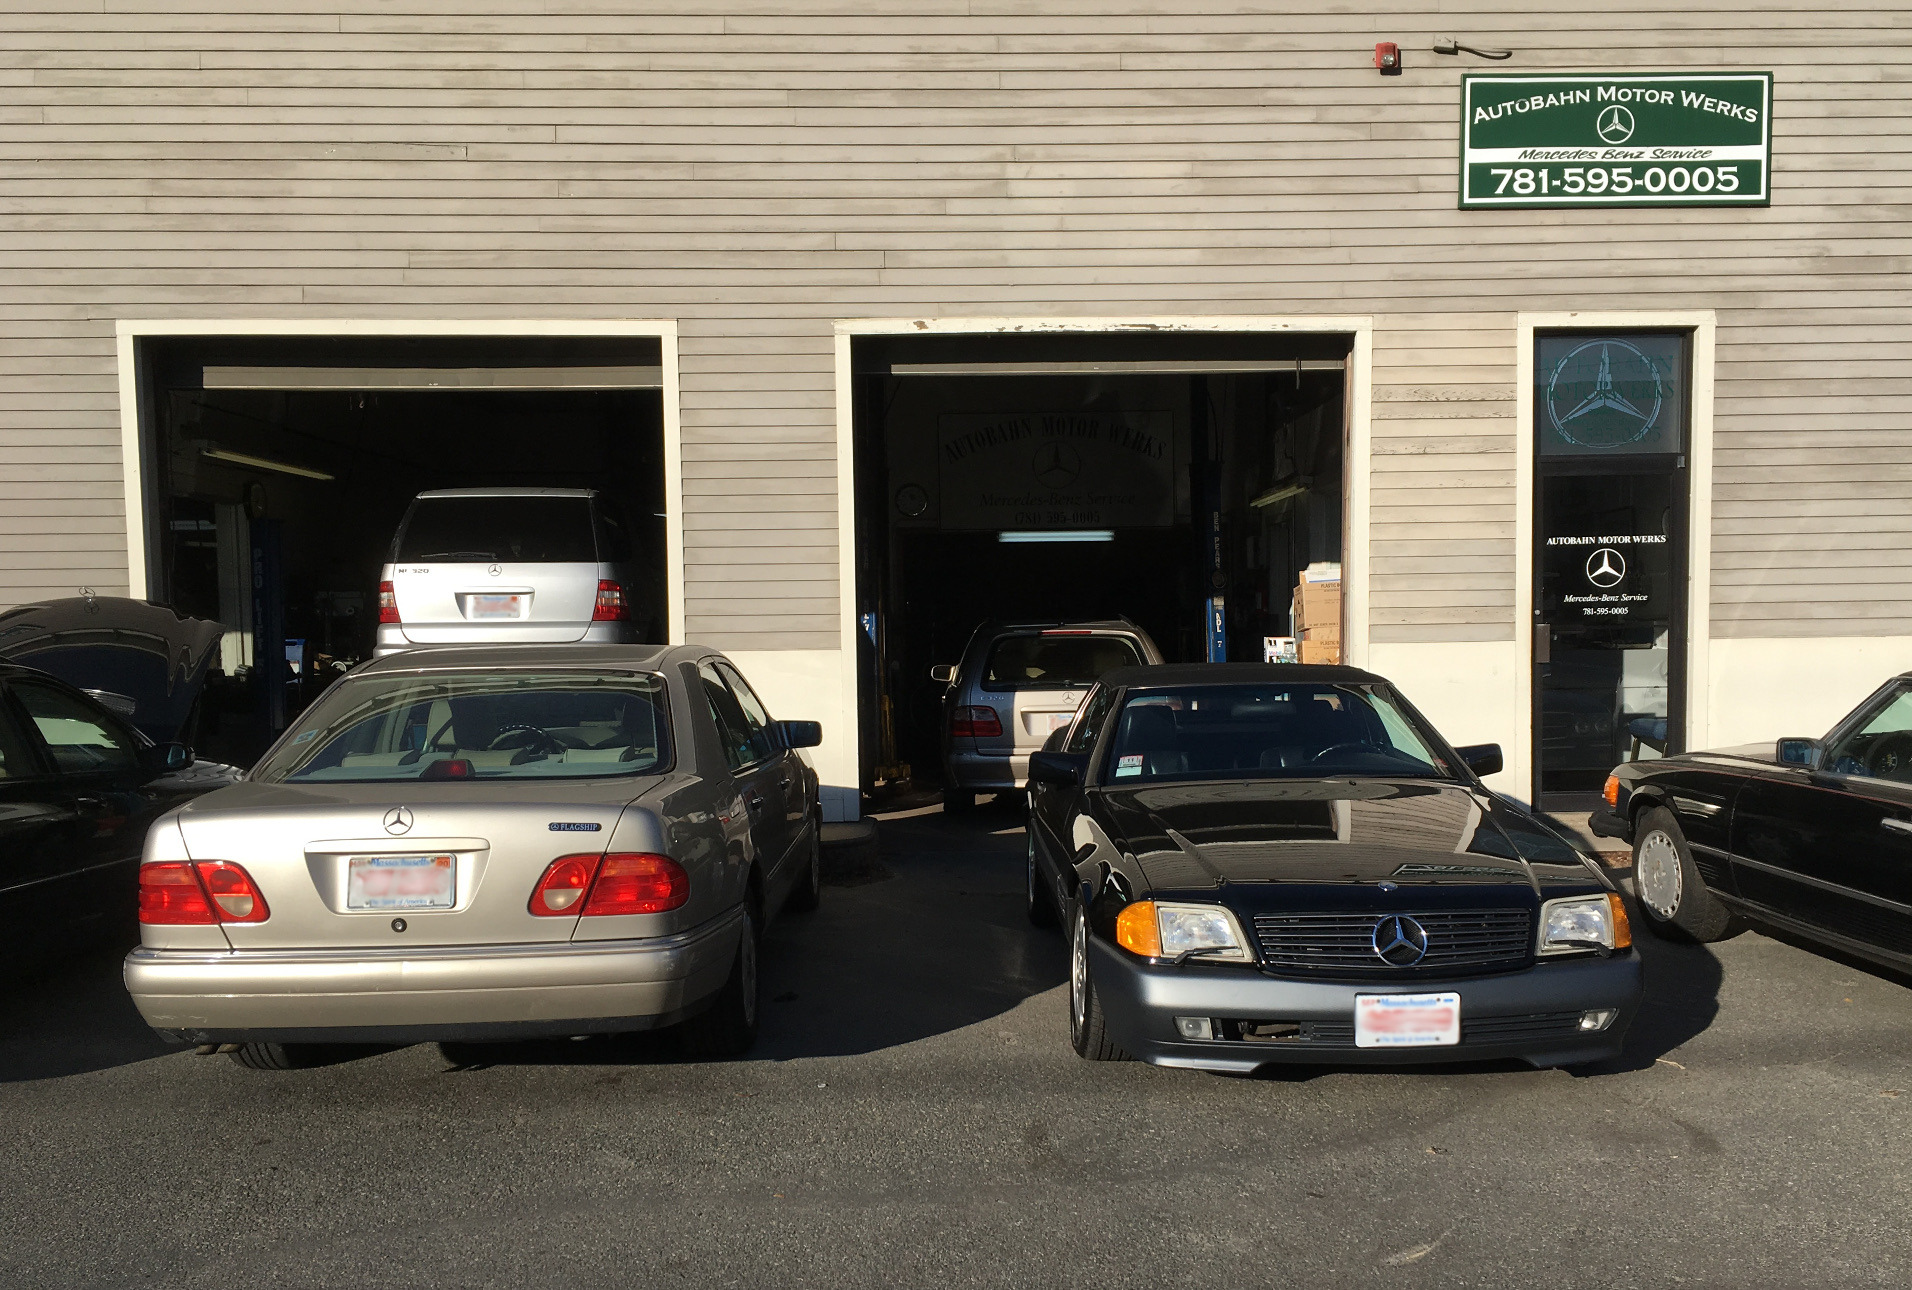 Picture of the workshop garage